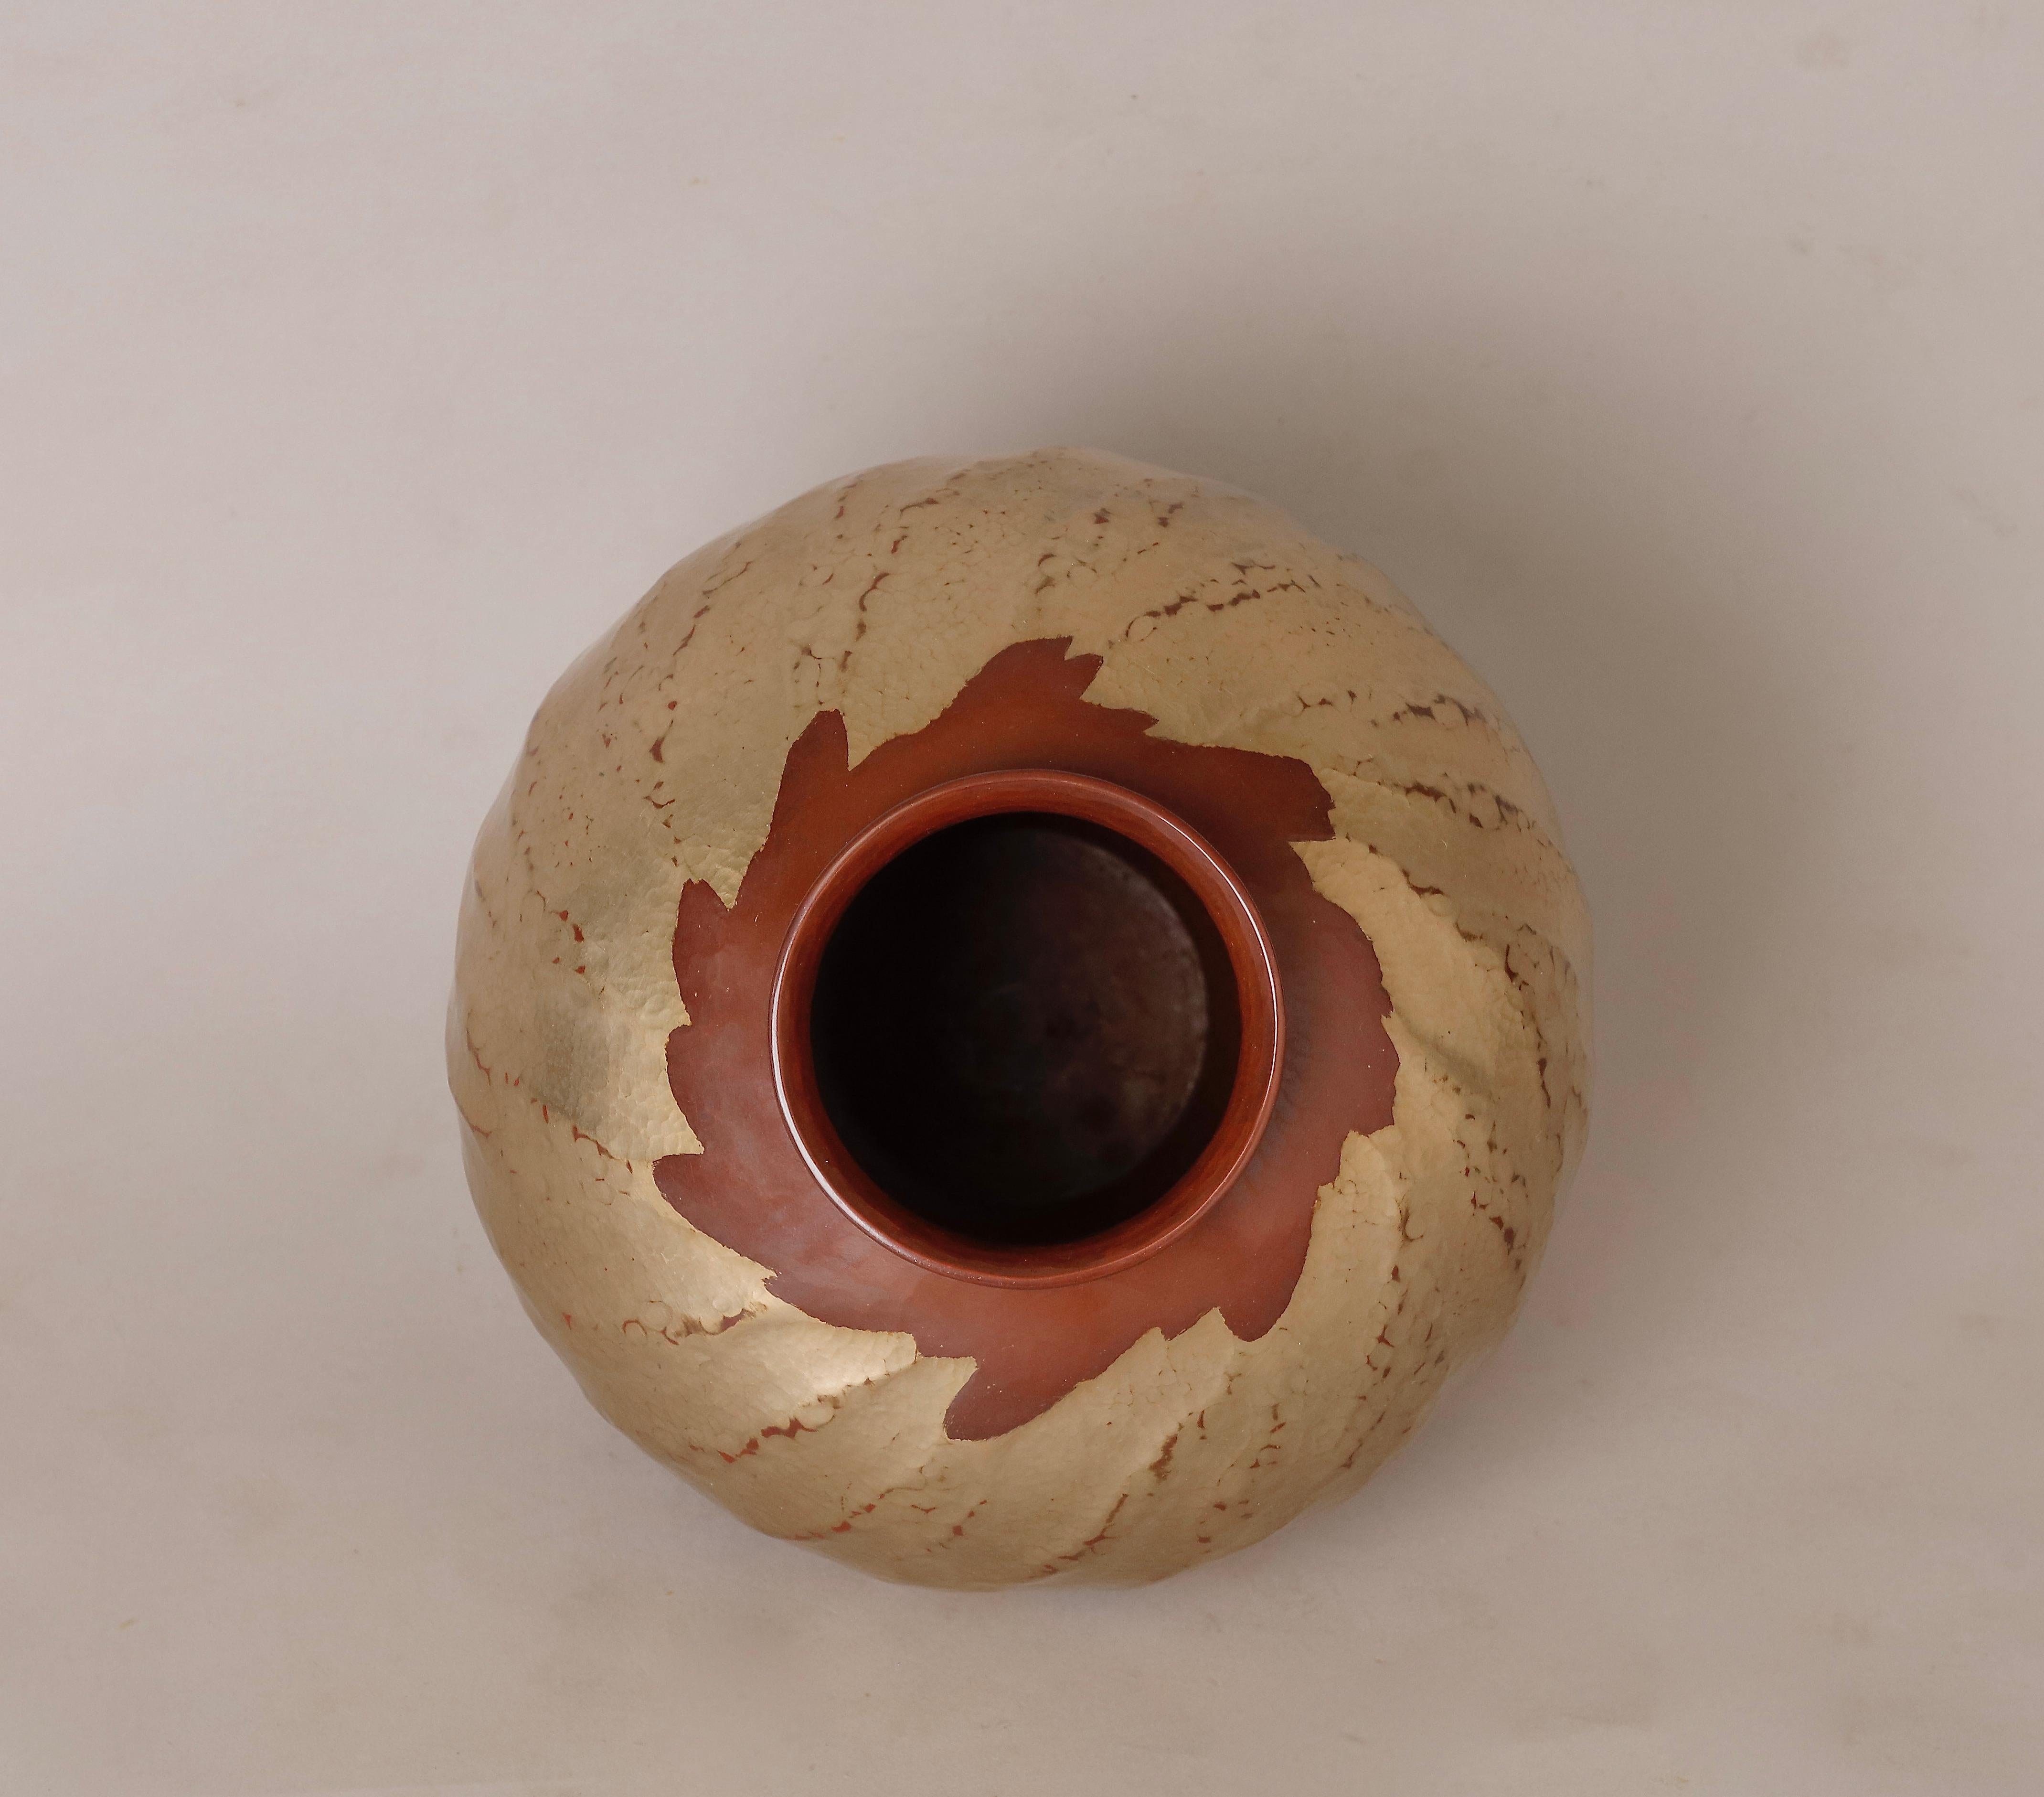 Artisanal Hand-Hammered Copper Vase by Renowned Gyokusendo 2